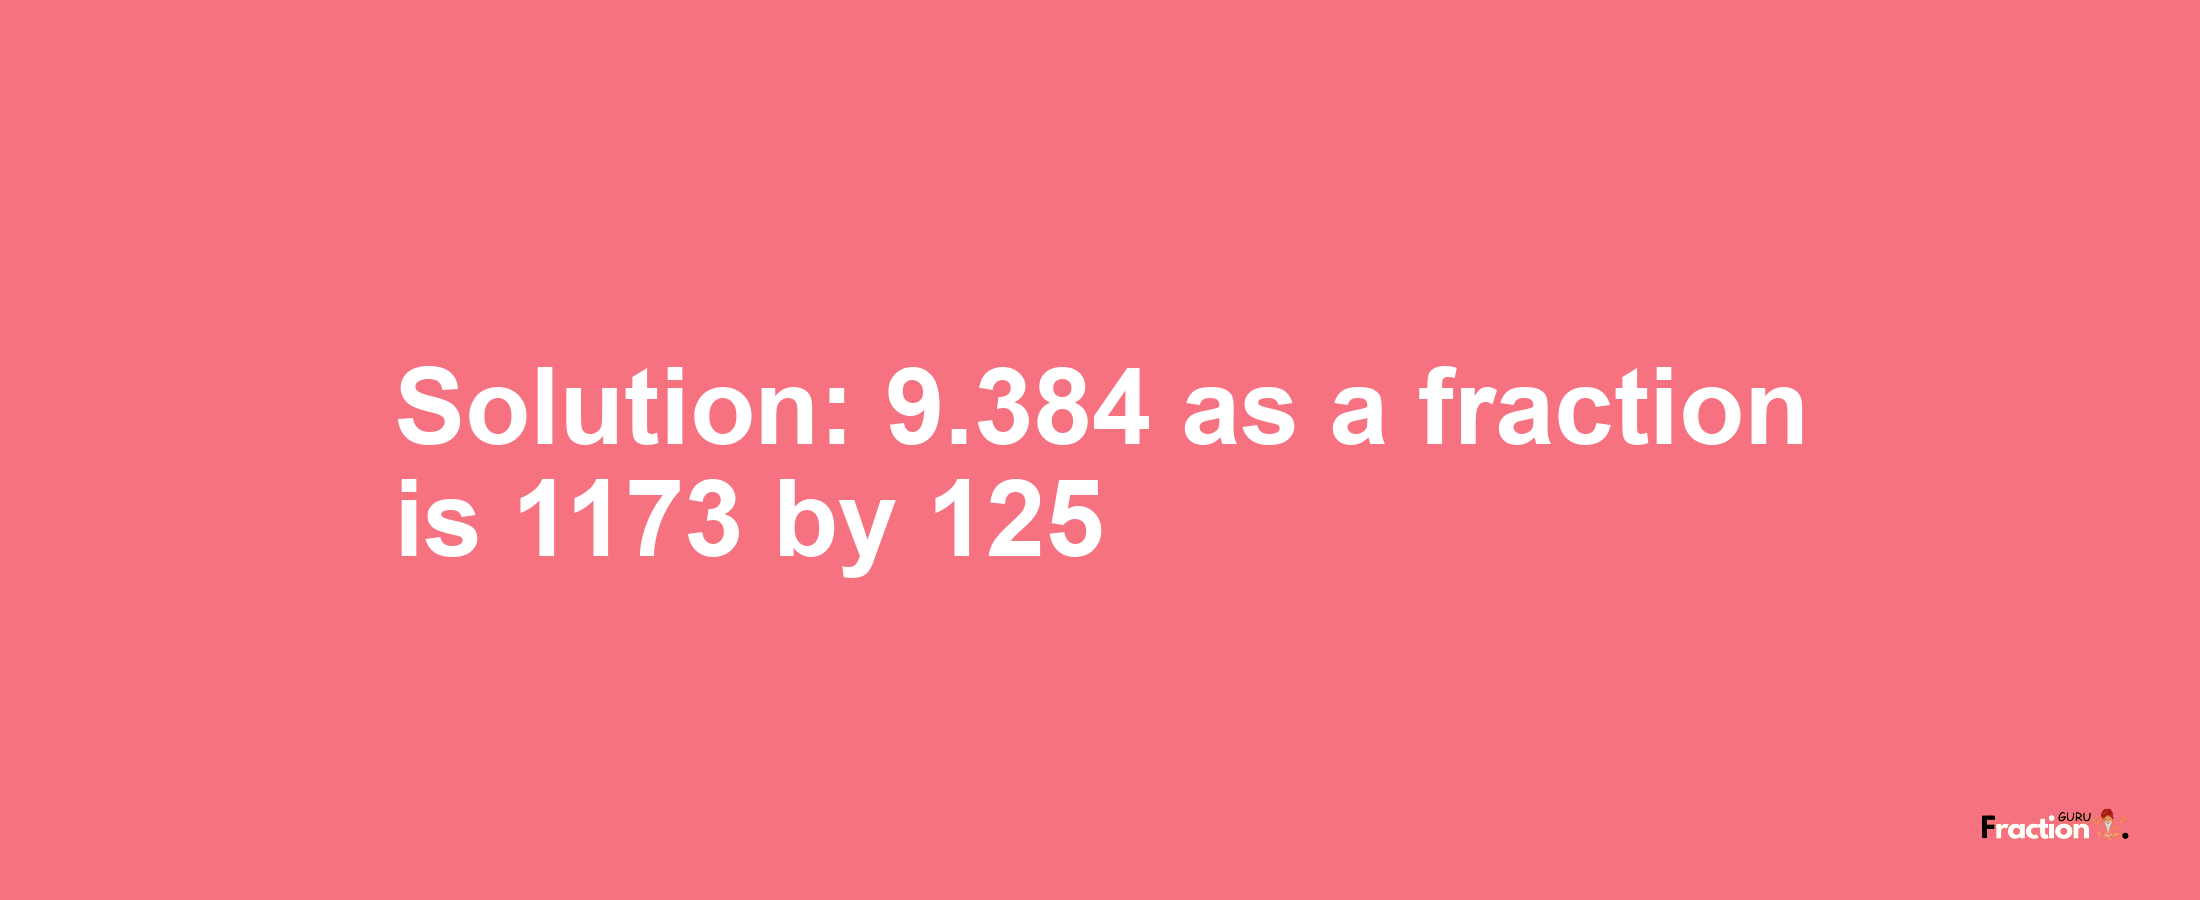 Solution:9.384 as a fraction is 1173/125